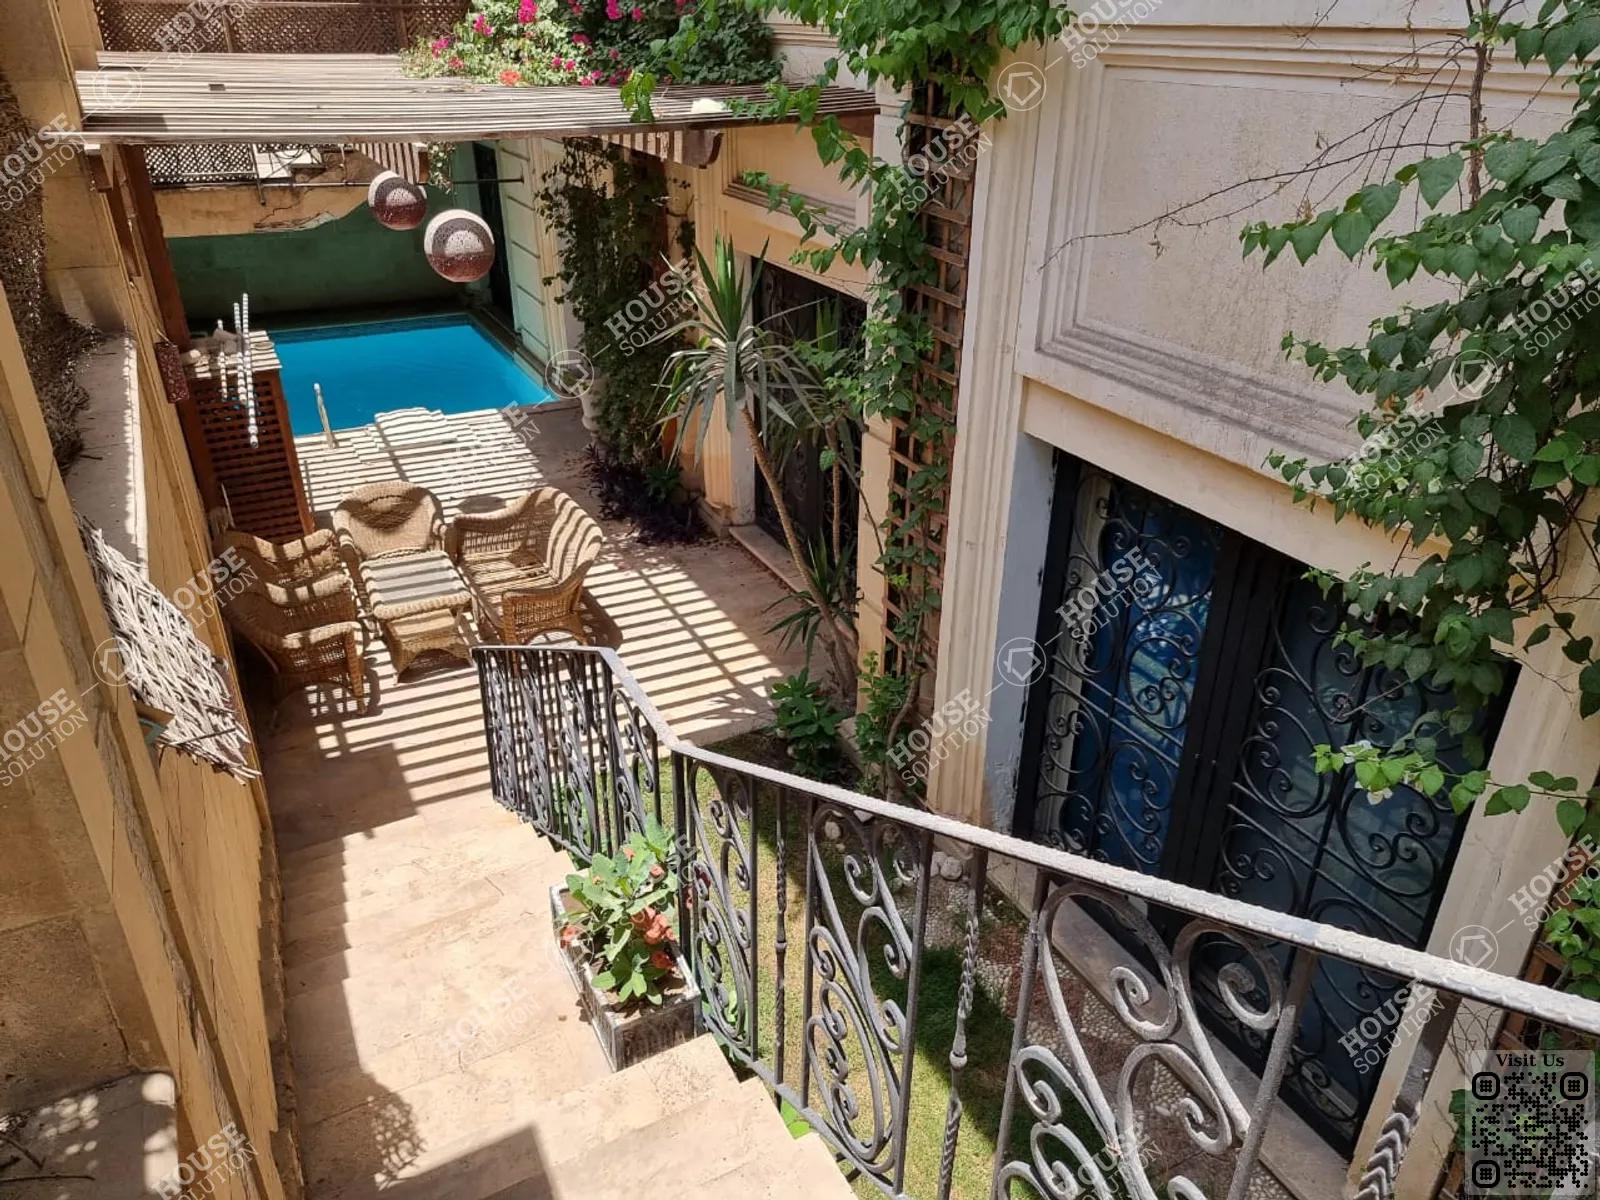 PRIVATE SWIMMING POOL  @ Ground Floors For Rent In Maadi Maadi Degla Area: 300 m² consists of 4 Bedrooms 4 Bathrooms Modern furnished 5 stars #5497-0